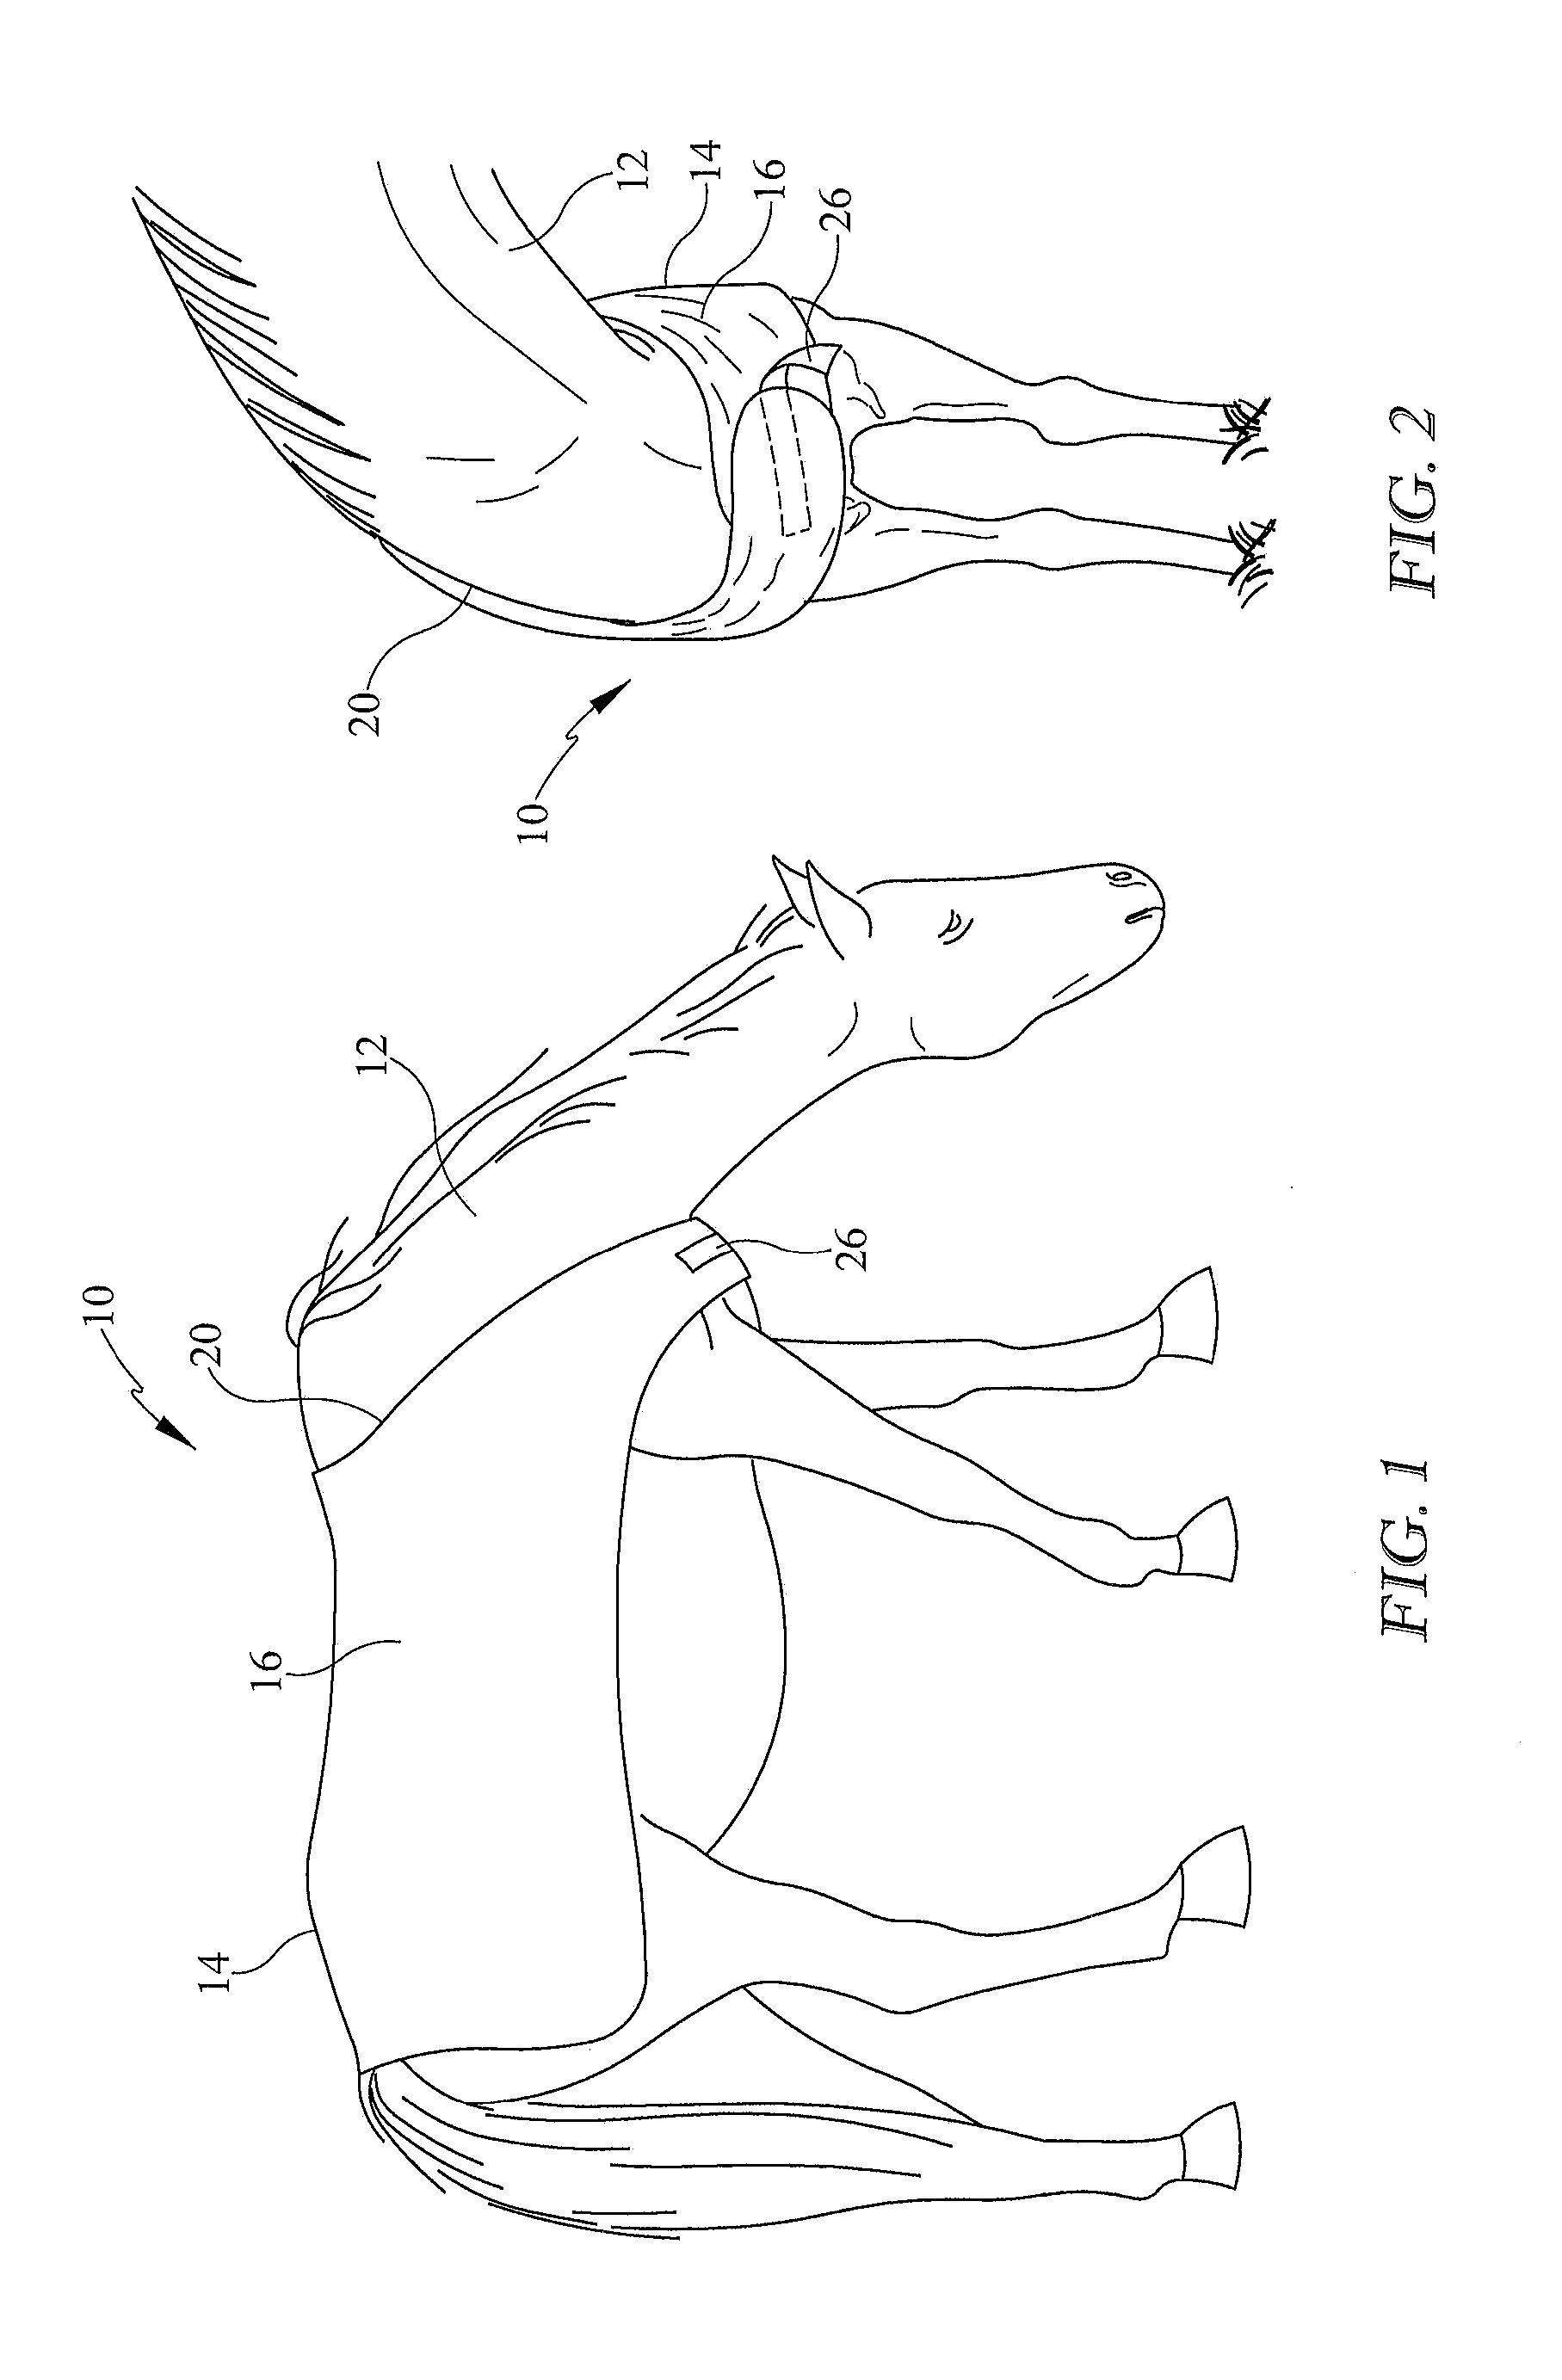 Method and apparatus of evaporative cooling for an animal